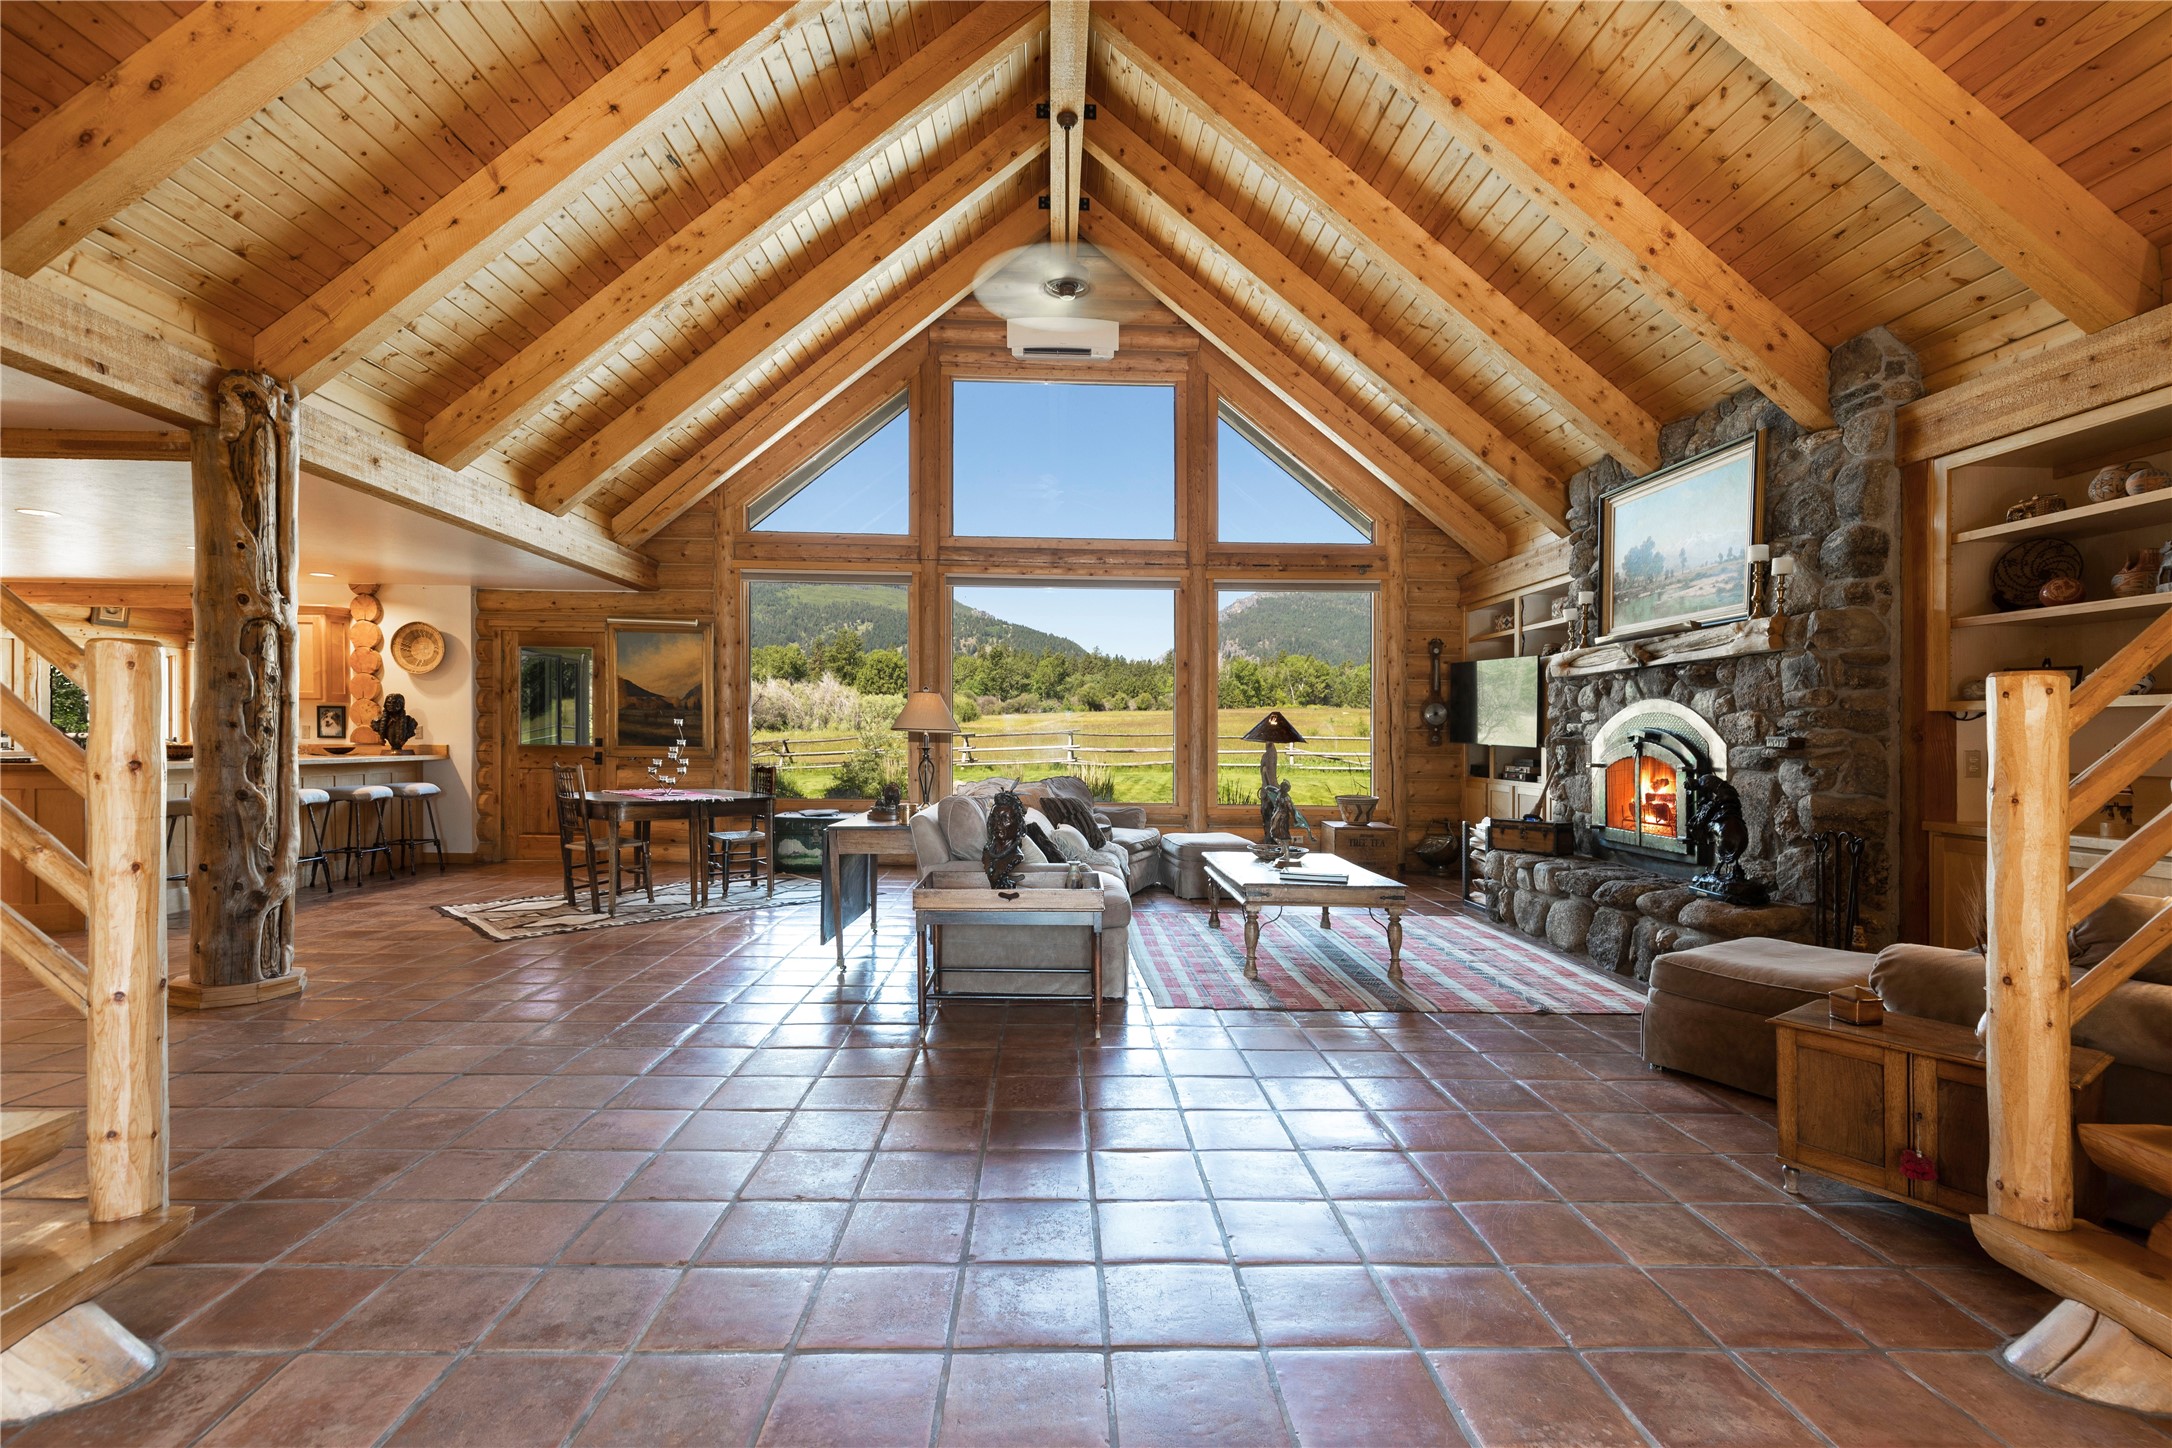 Experience the ultimate Montana lifestyle with this exceptional, established 50-acre legacy ranch property. Live your dreams surrounded by the breathtaking beauty of the Fred Burr Canyon Ranch with a stunning 6,448 SF 3+ bedroom, 4.5 bathroom home, 2 guest cabins, barn, ponds, irrigation, & historic dry-cabin (rumored to be an old single room schoolhouse)! Immerse yourself in the vibrant Montana life & indulge in every aspect of the Big Sky life. For detailed square footage information, please check the additional remarks section. Don't miss the chance to take the virtual video tour, as it will help you fully appreciate the unparalleled beauty and serenity that await you. Start living your Montana dream today and make this extraordinary property your own! Contact Bobbi J. Lockhart at 406-880-0117, or your real estate professional. Guest House: ~1297 SQ FT
Cabin: ~581 SQ FT
Barn: ~1,478 SQ FT
Greenhouse: ~96 SQ FT
Garage/Shop: ~1,180 SQ FT
Loafing Sheds: ~240 SQ FT & ~133 SQ FT
Log Outbuilding: ~600 SQ FT
Pump House: ~48 SQ FT